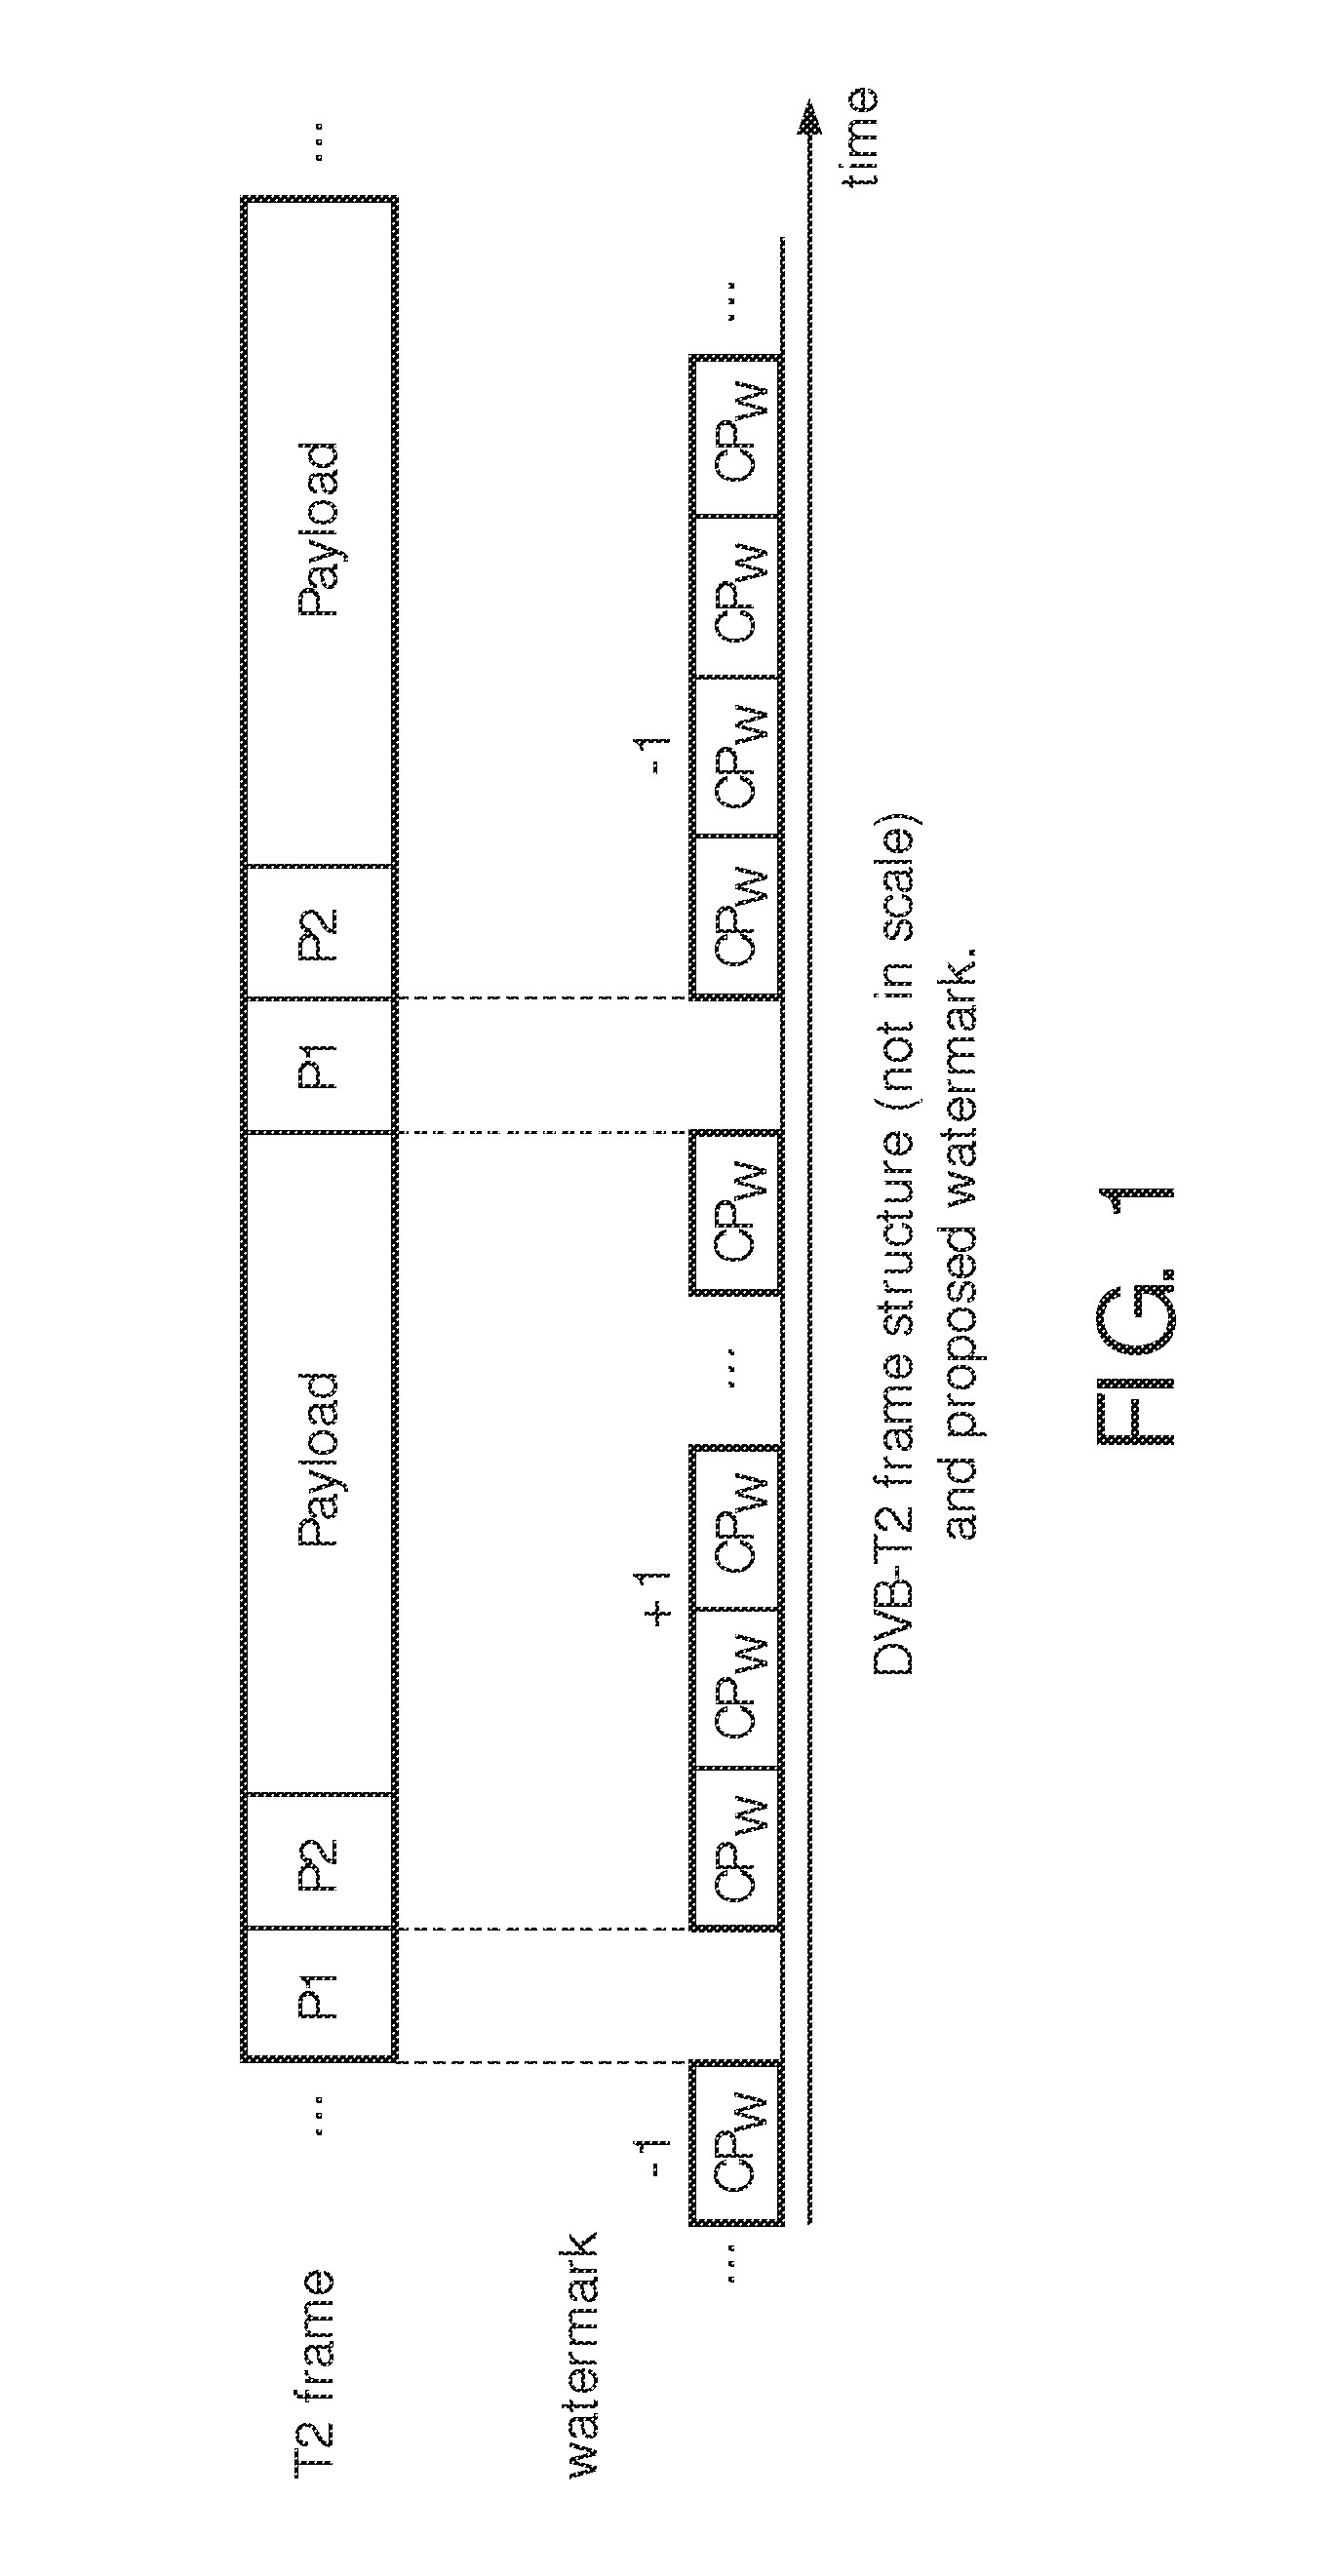 Watermarked based physical layer authentication method of transmitters in ofd communications systems